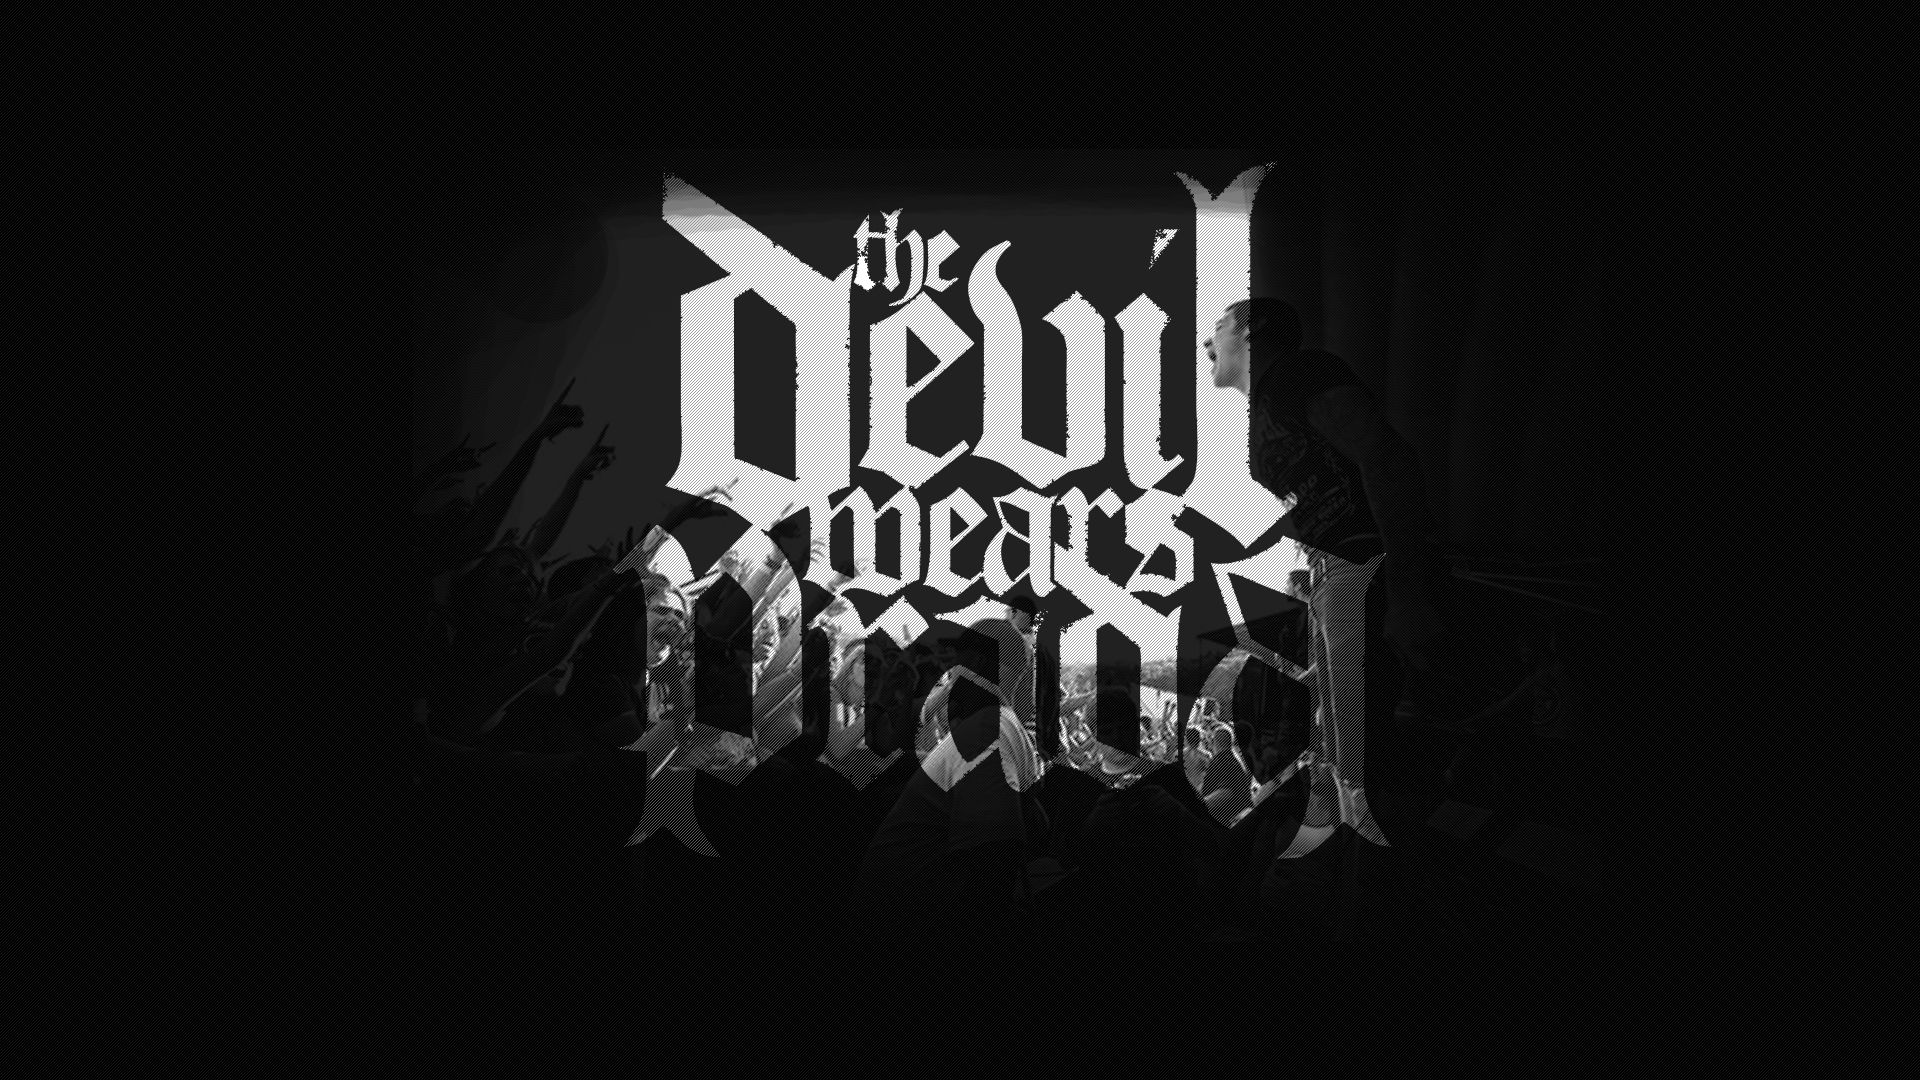 Gallery for - devil wears prada wallpapers band